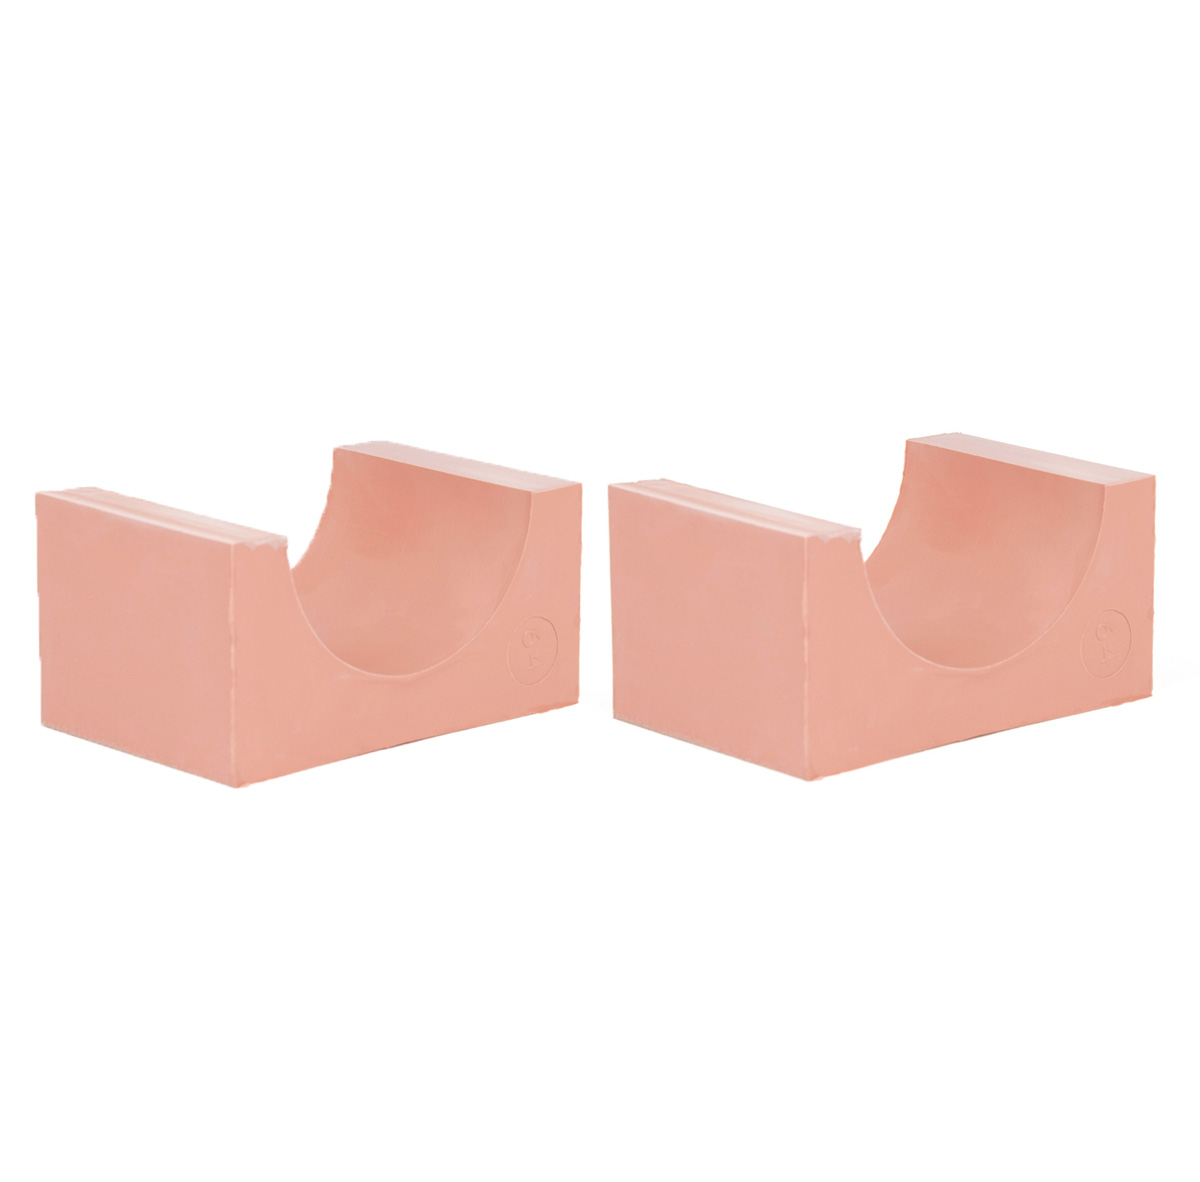 90-64*2 Set of 2 half insert block lycron, 90-64 for cable/pipe diam. 63.5-65.5mm